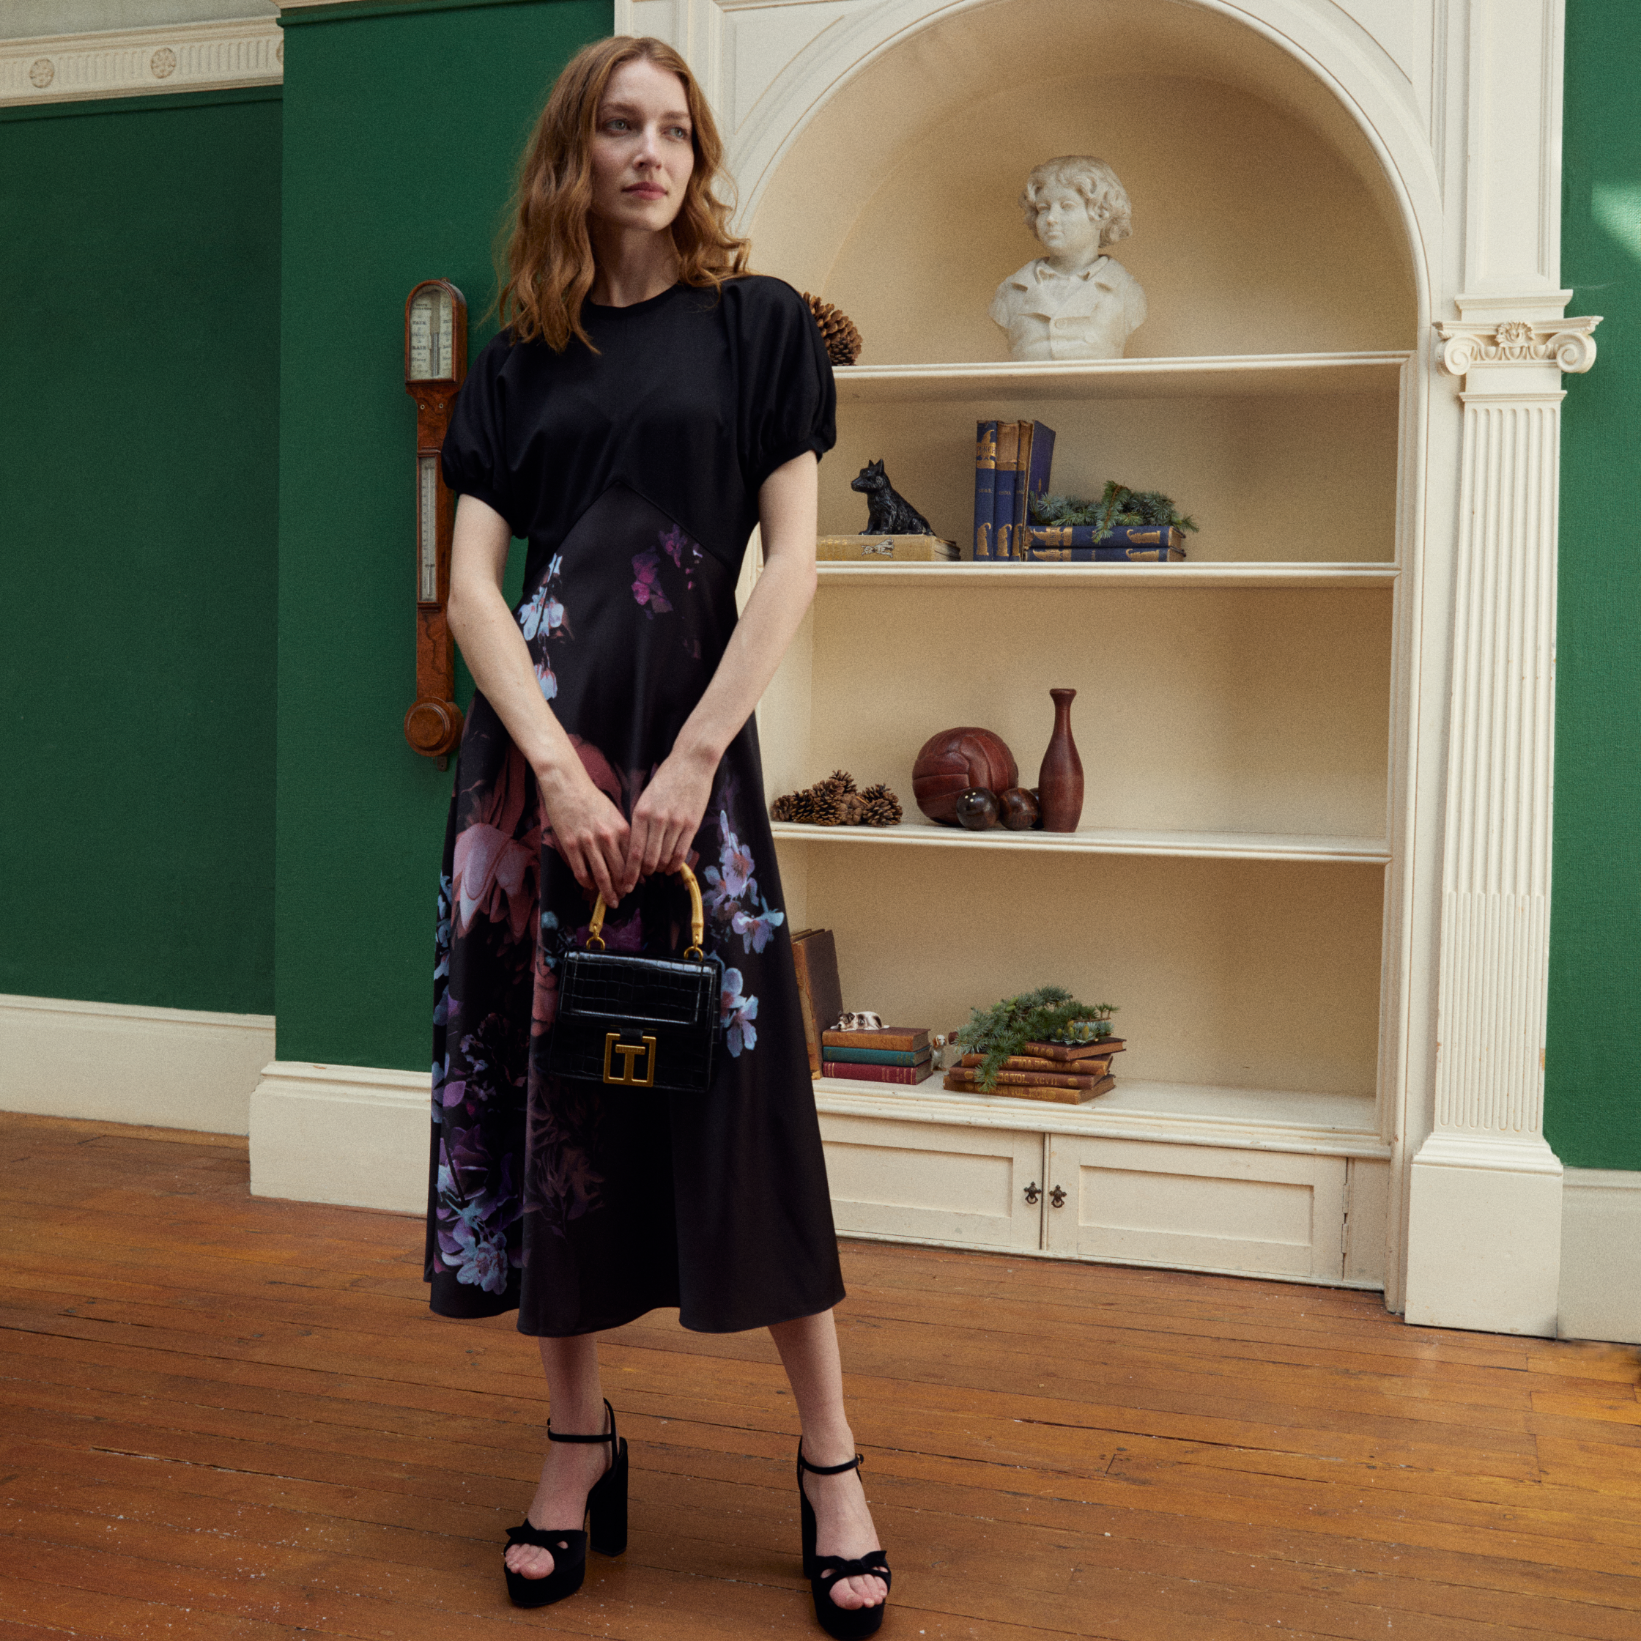 Homepage  Ted Baker ROW